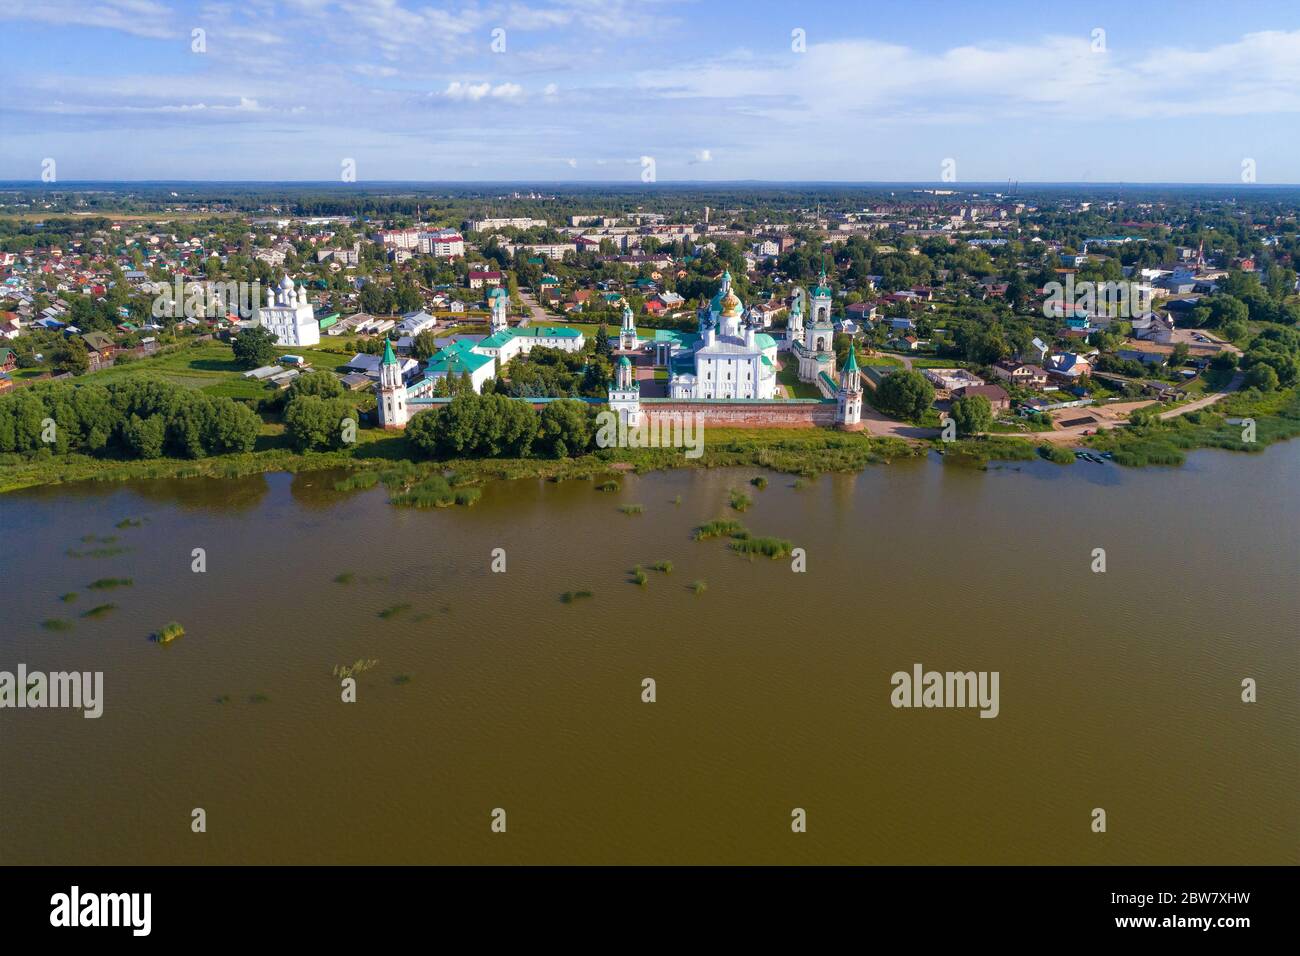 View of the Spaso-Yakovlevsky Dmitrovsky Monastery from the side of Nero lake on a sunny July day (aerial photography). Rostov, Golden Ring of Russia Stock Photo